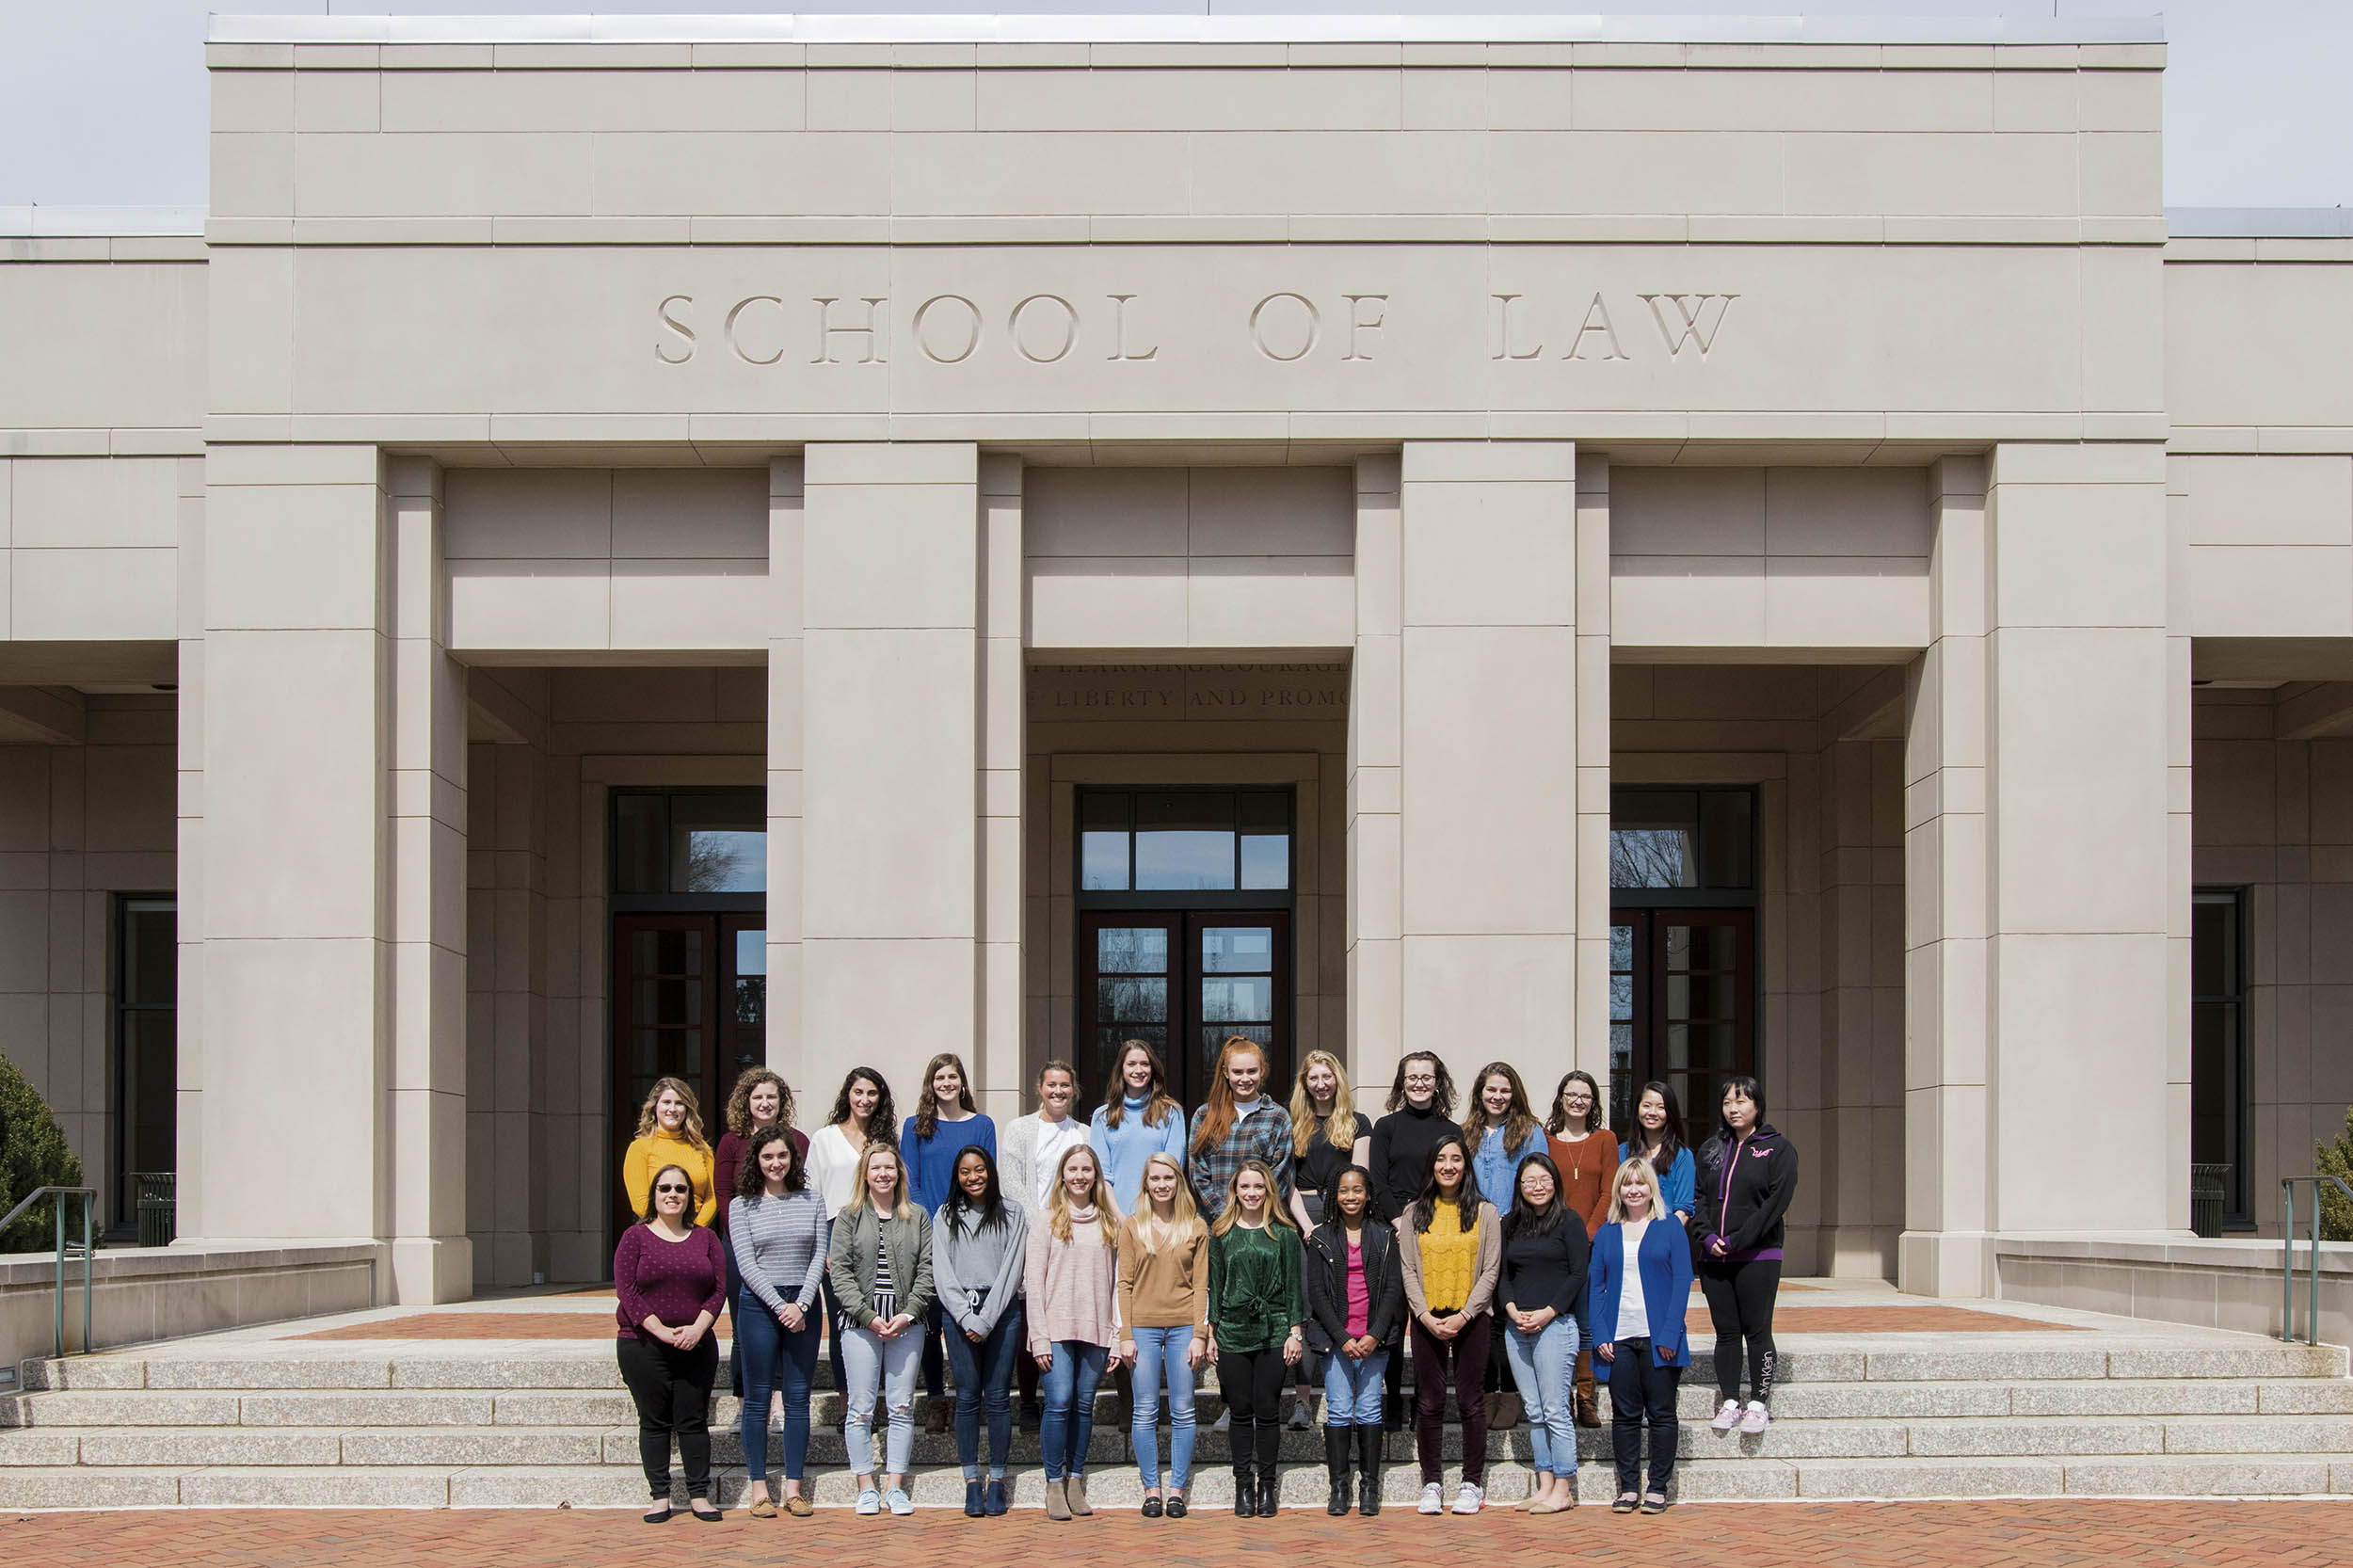 Group photo in front of the School of Law building